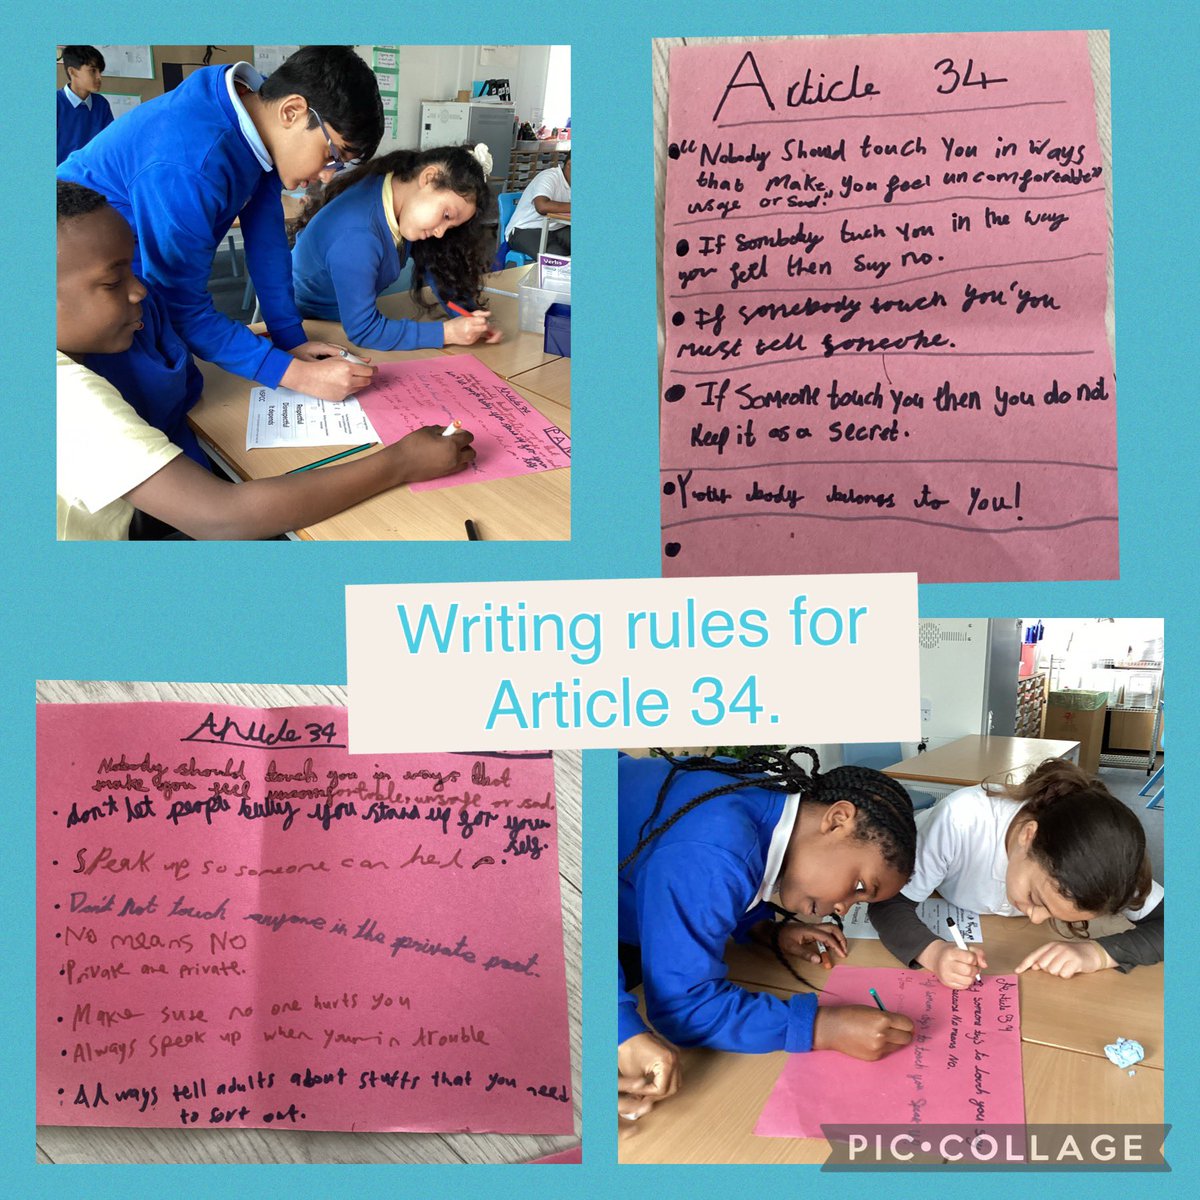 Year 5 have been writing some rules on Article 34 of the UNCRC.